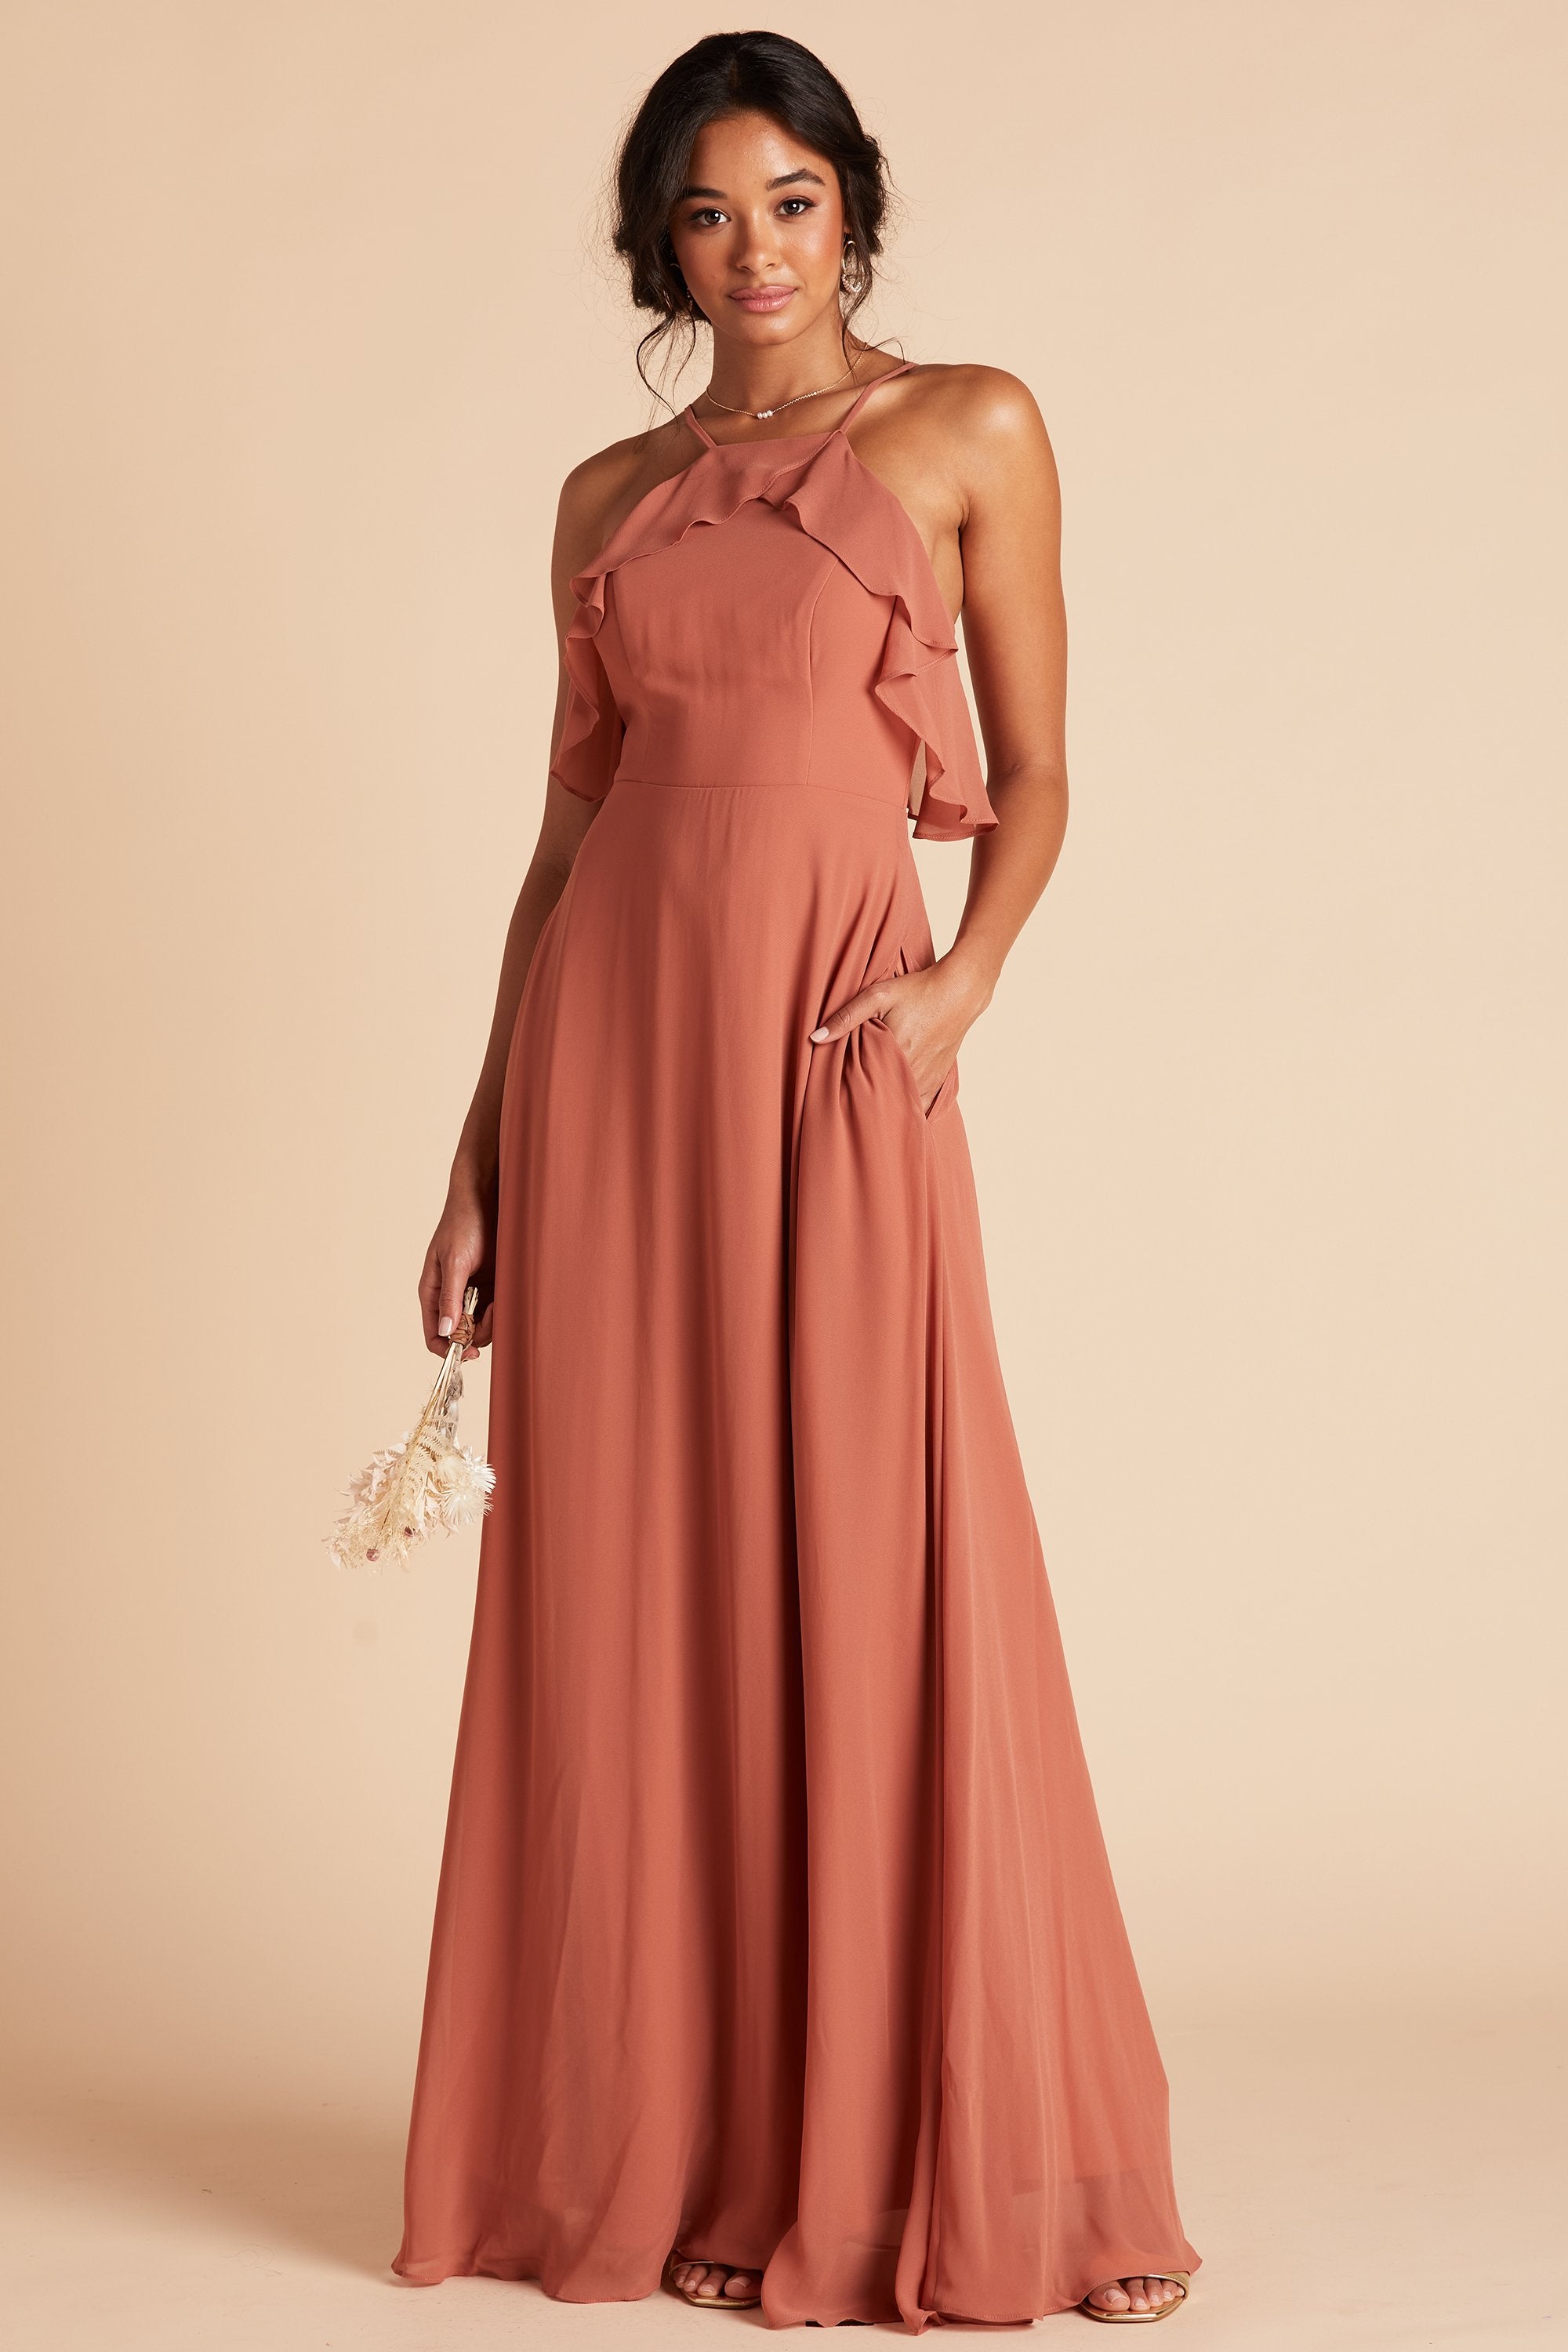 Front view of the Jules Dress in terracotta chiffon worn by a slender model with a medium skin tone.